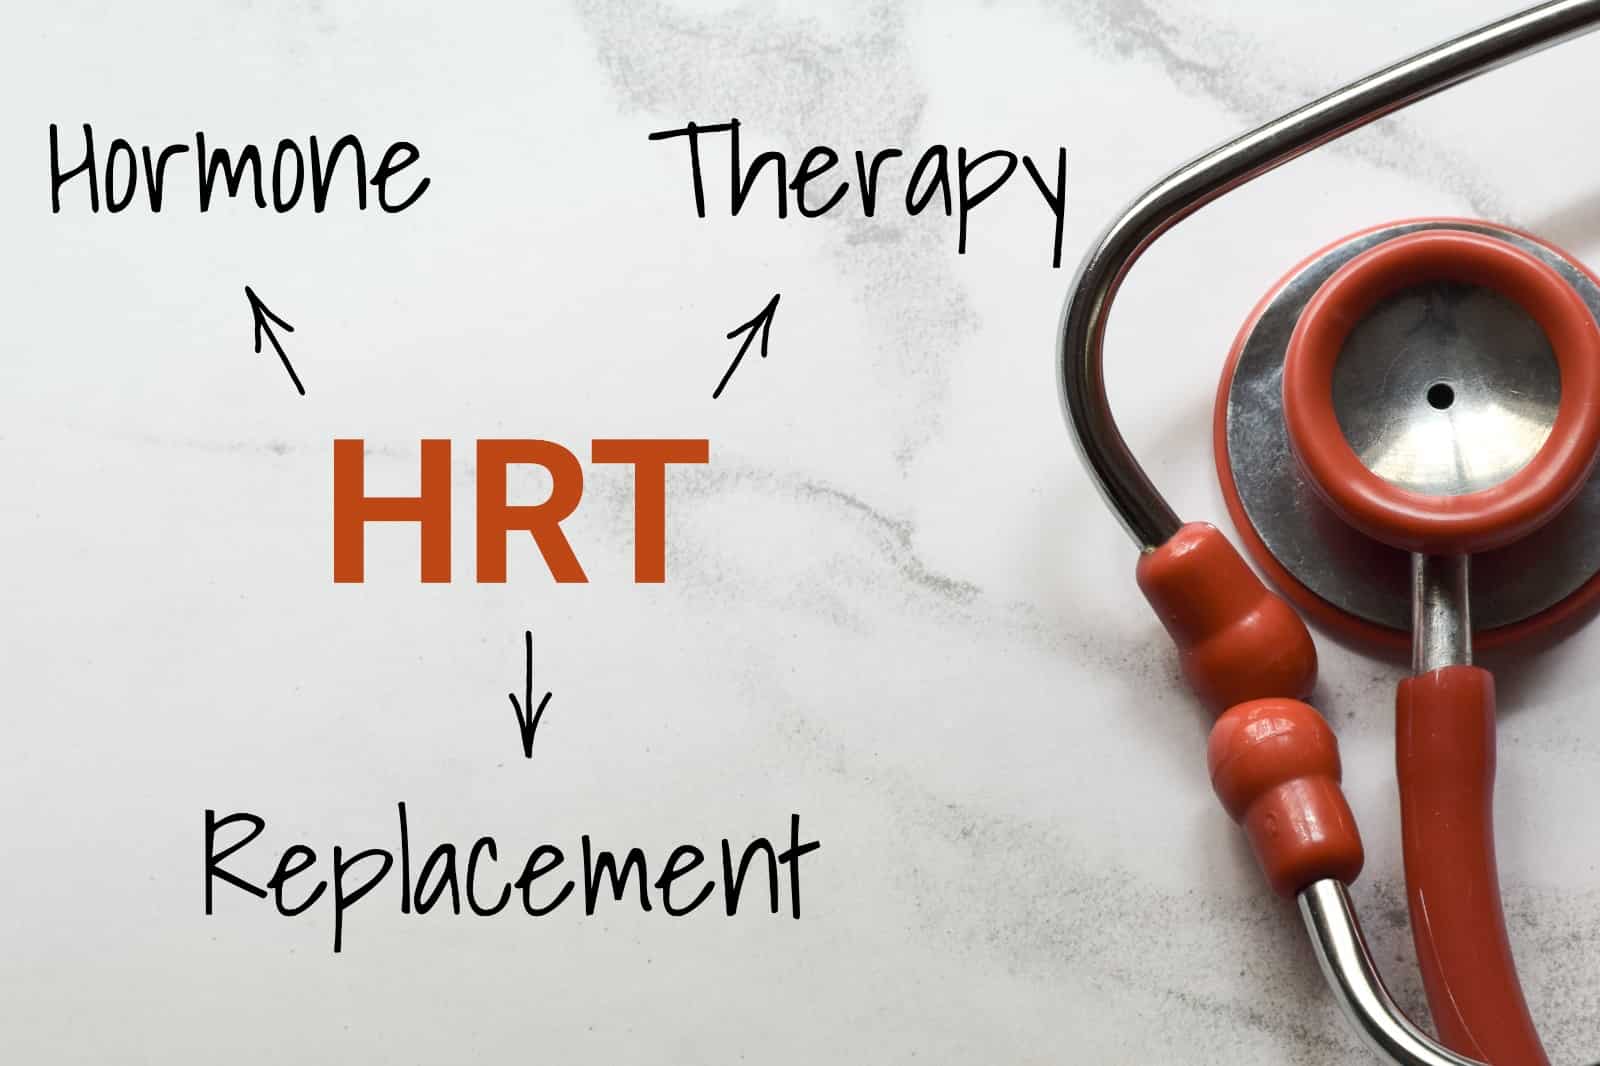 A dive into hormone replacement therapy